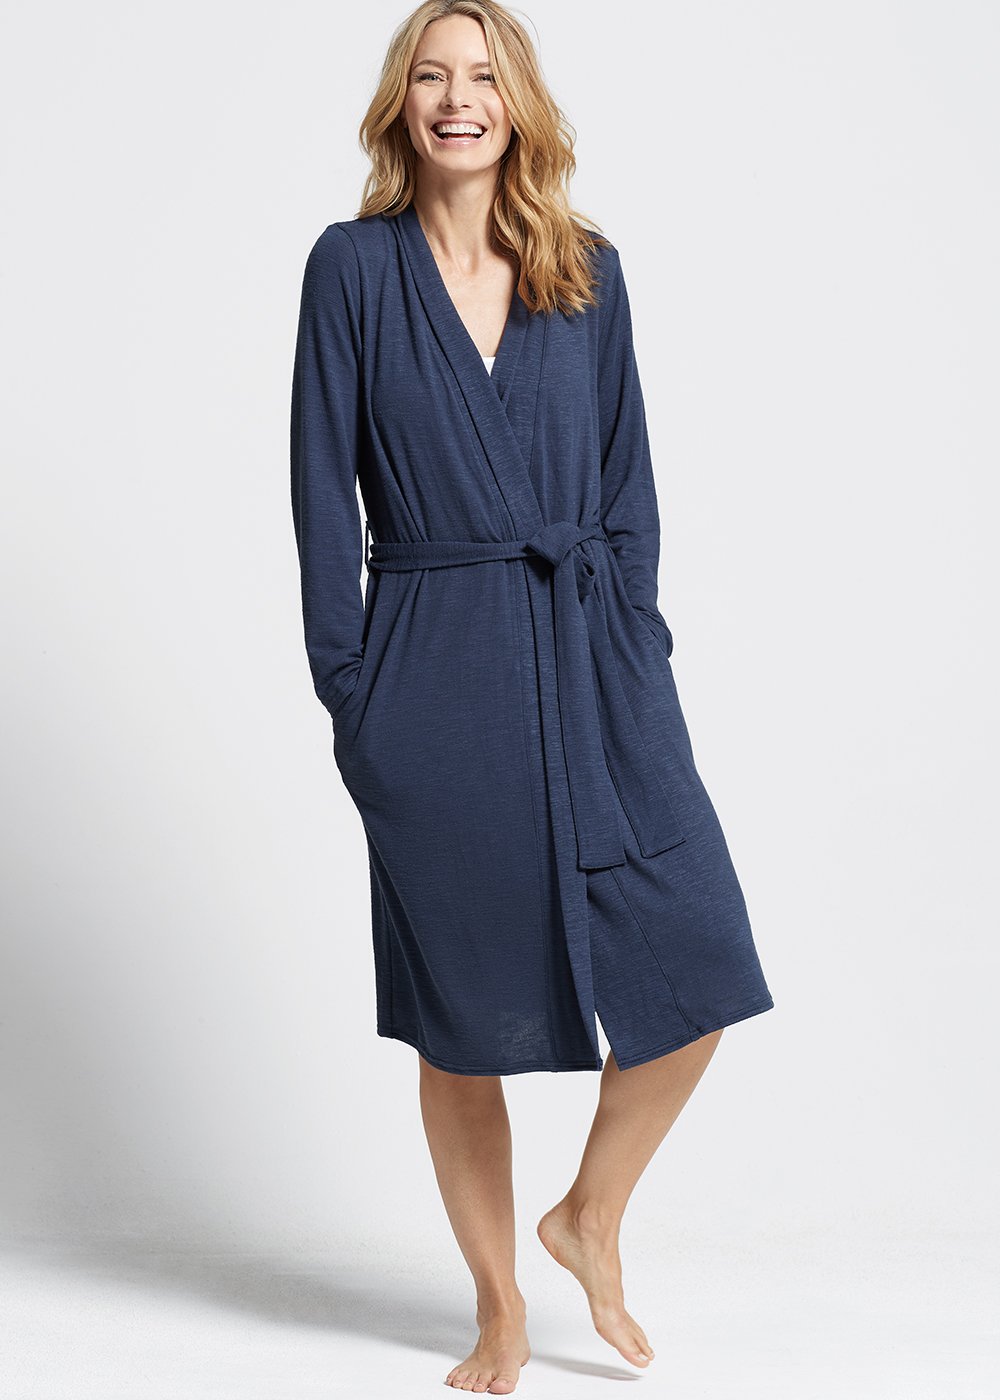 Yummie has just created the ultimate work-from-home loungewear